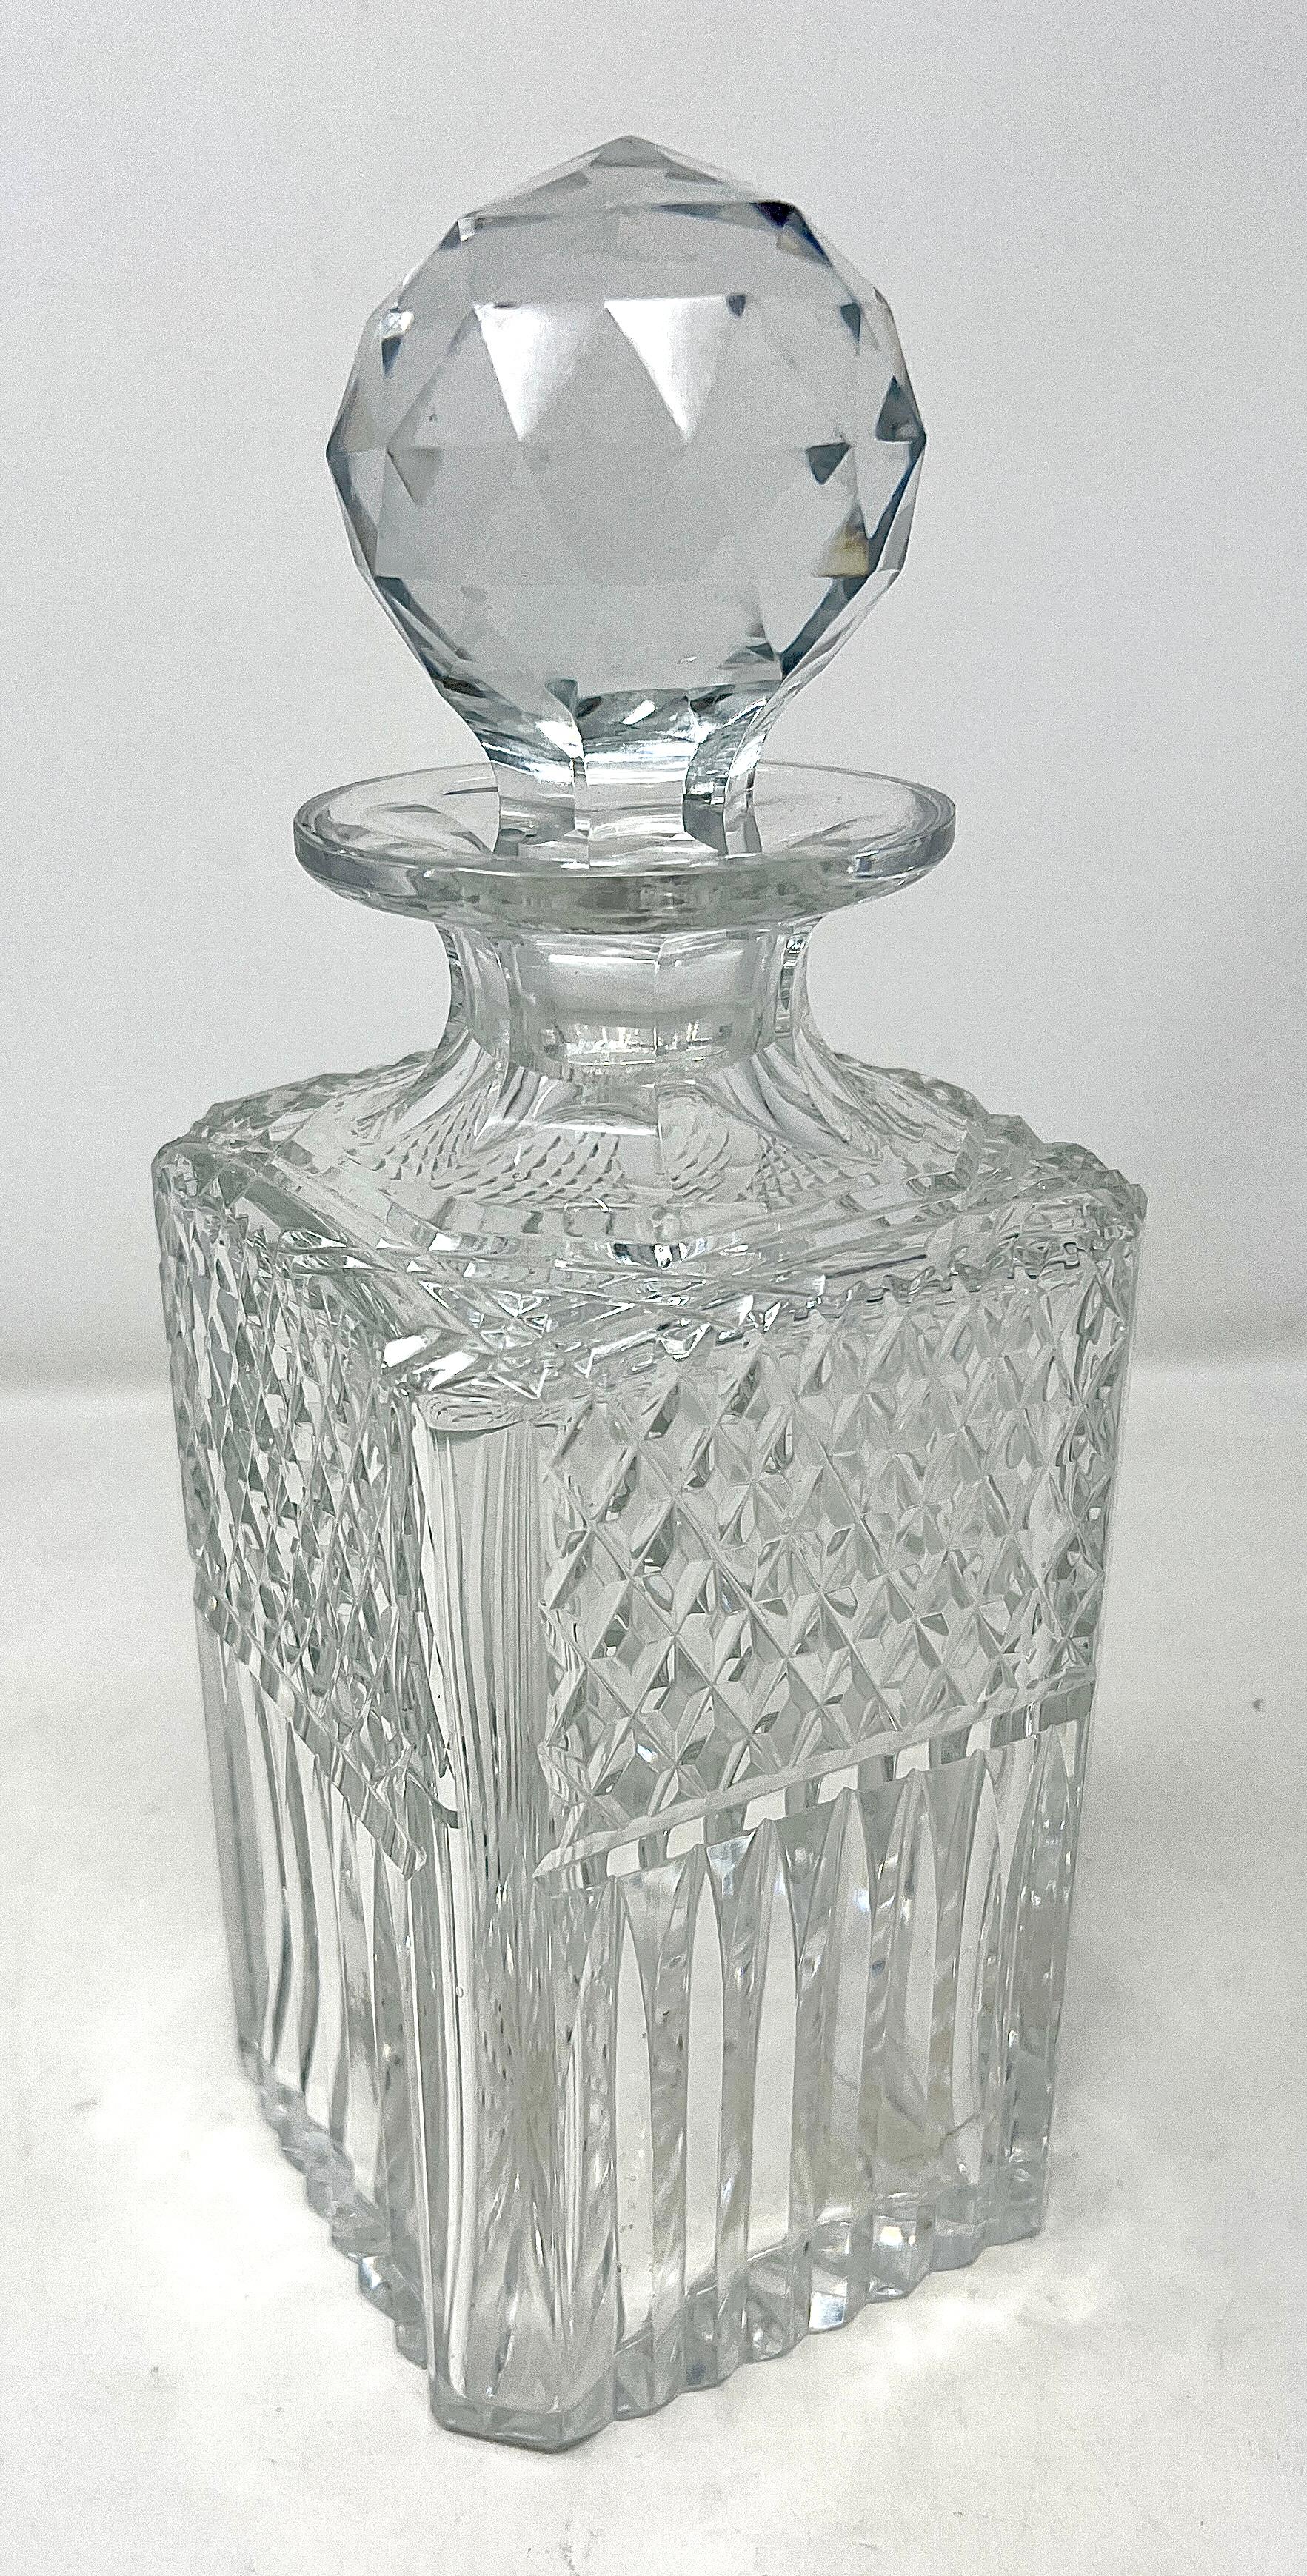 Estate American Brilliant Cut Crystal Decanter, Circa 1930-1940.
Per the last two photos double old fashioned glasses and other crystal wine decanters are available and listed individually.